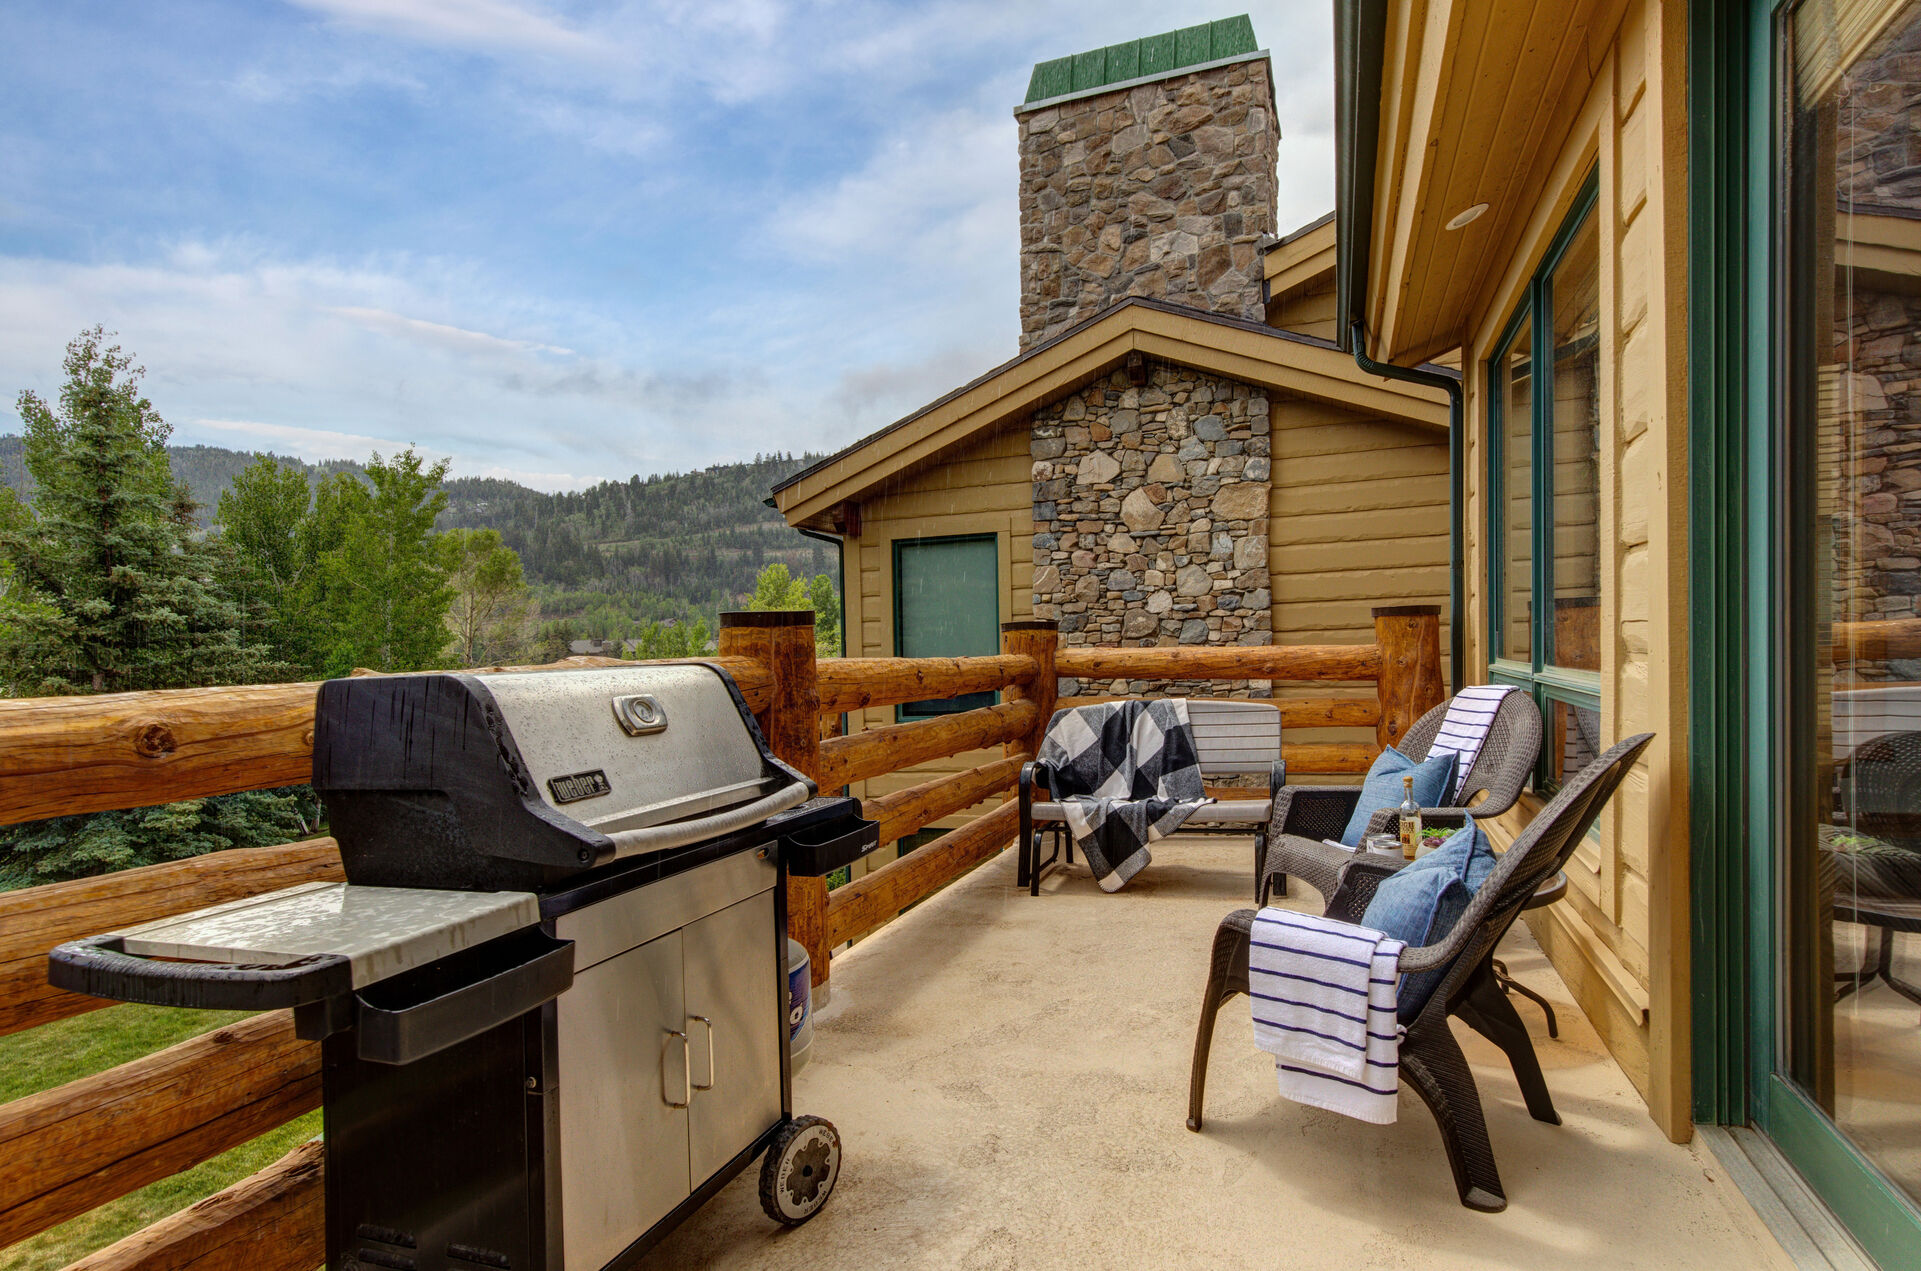 Private Hot Tub Patio overlooking Deer Valley Resort with BBQ grill and outdoor furnishings